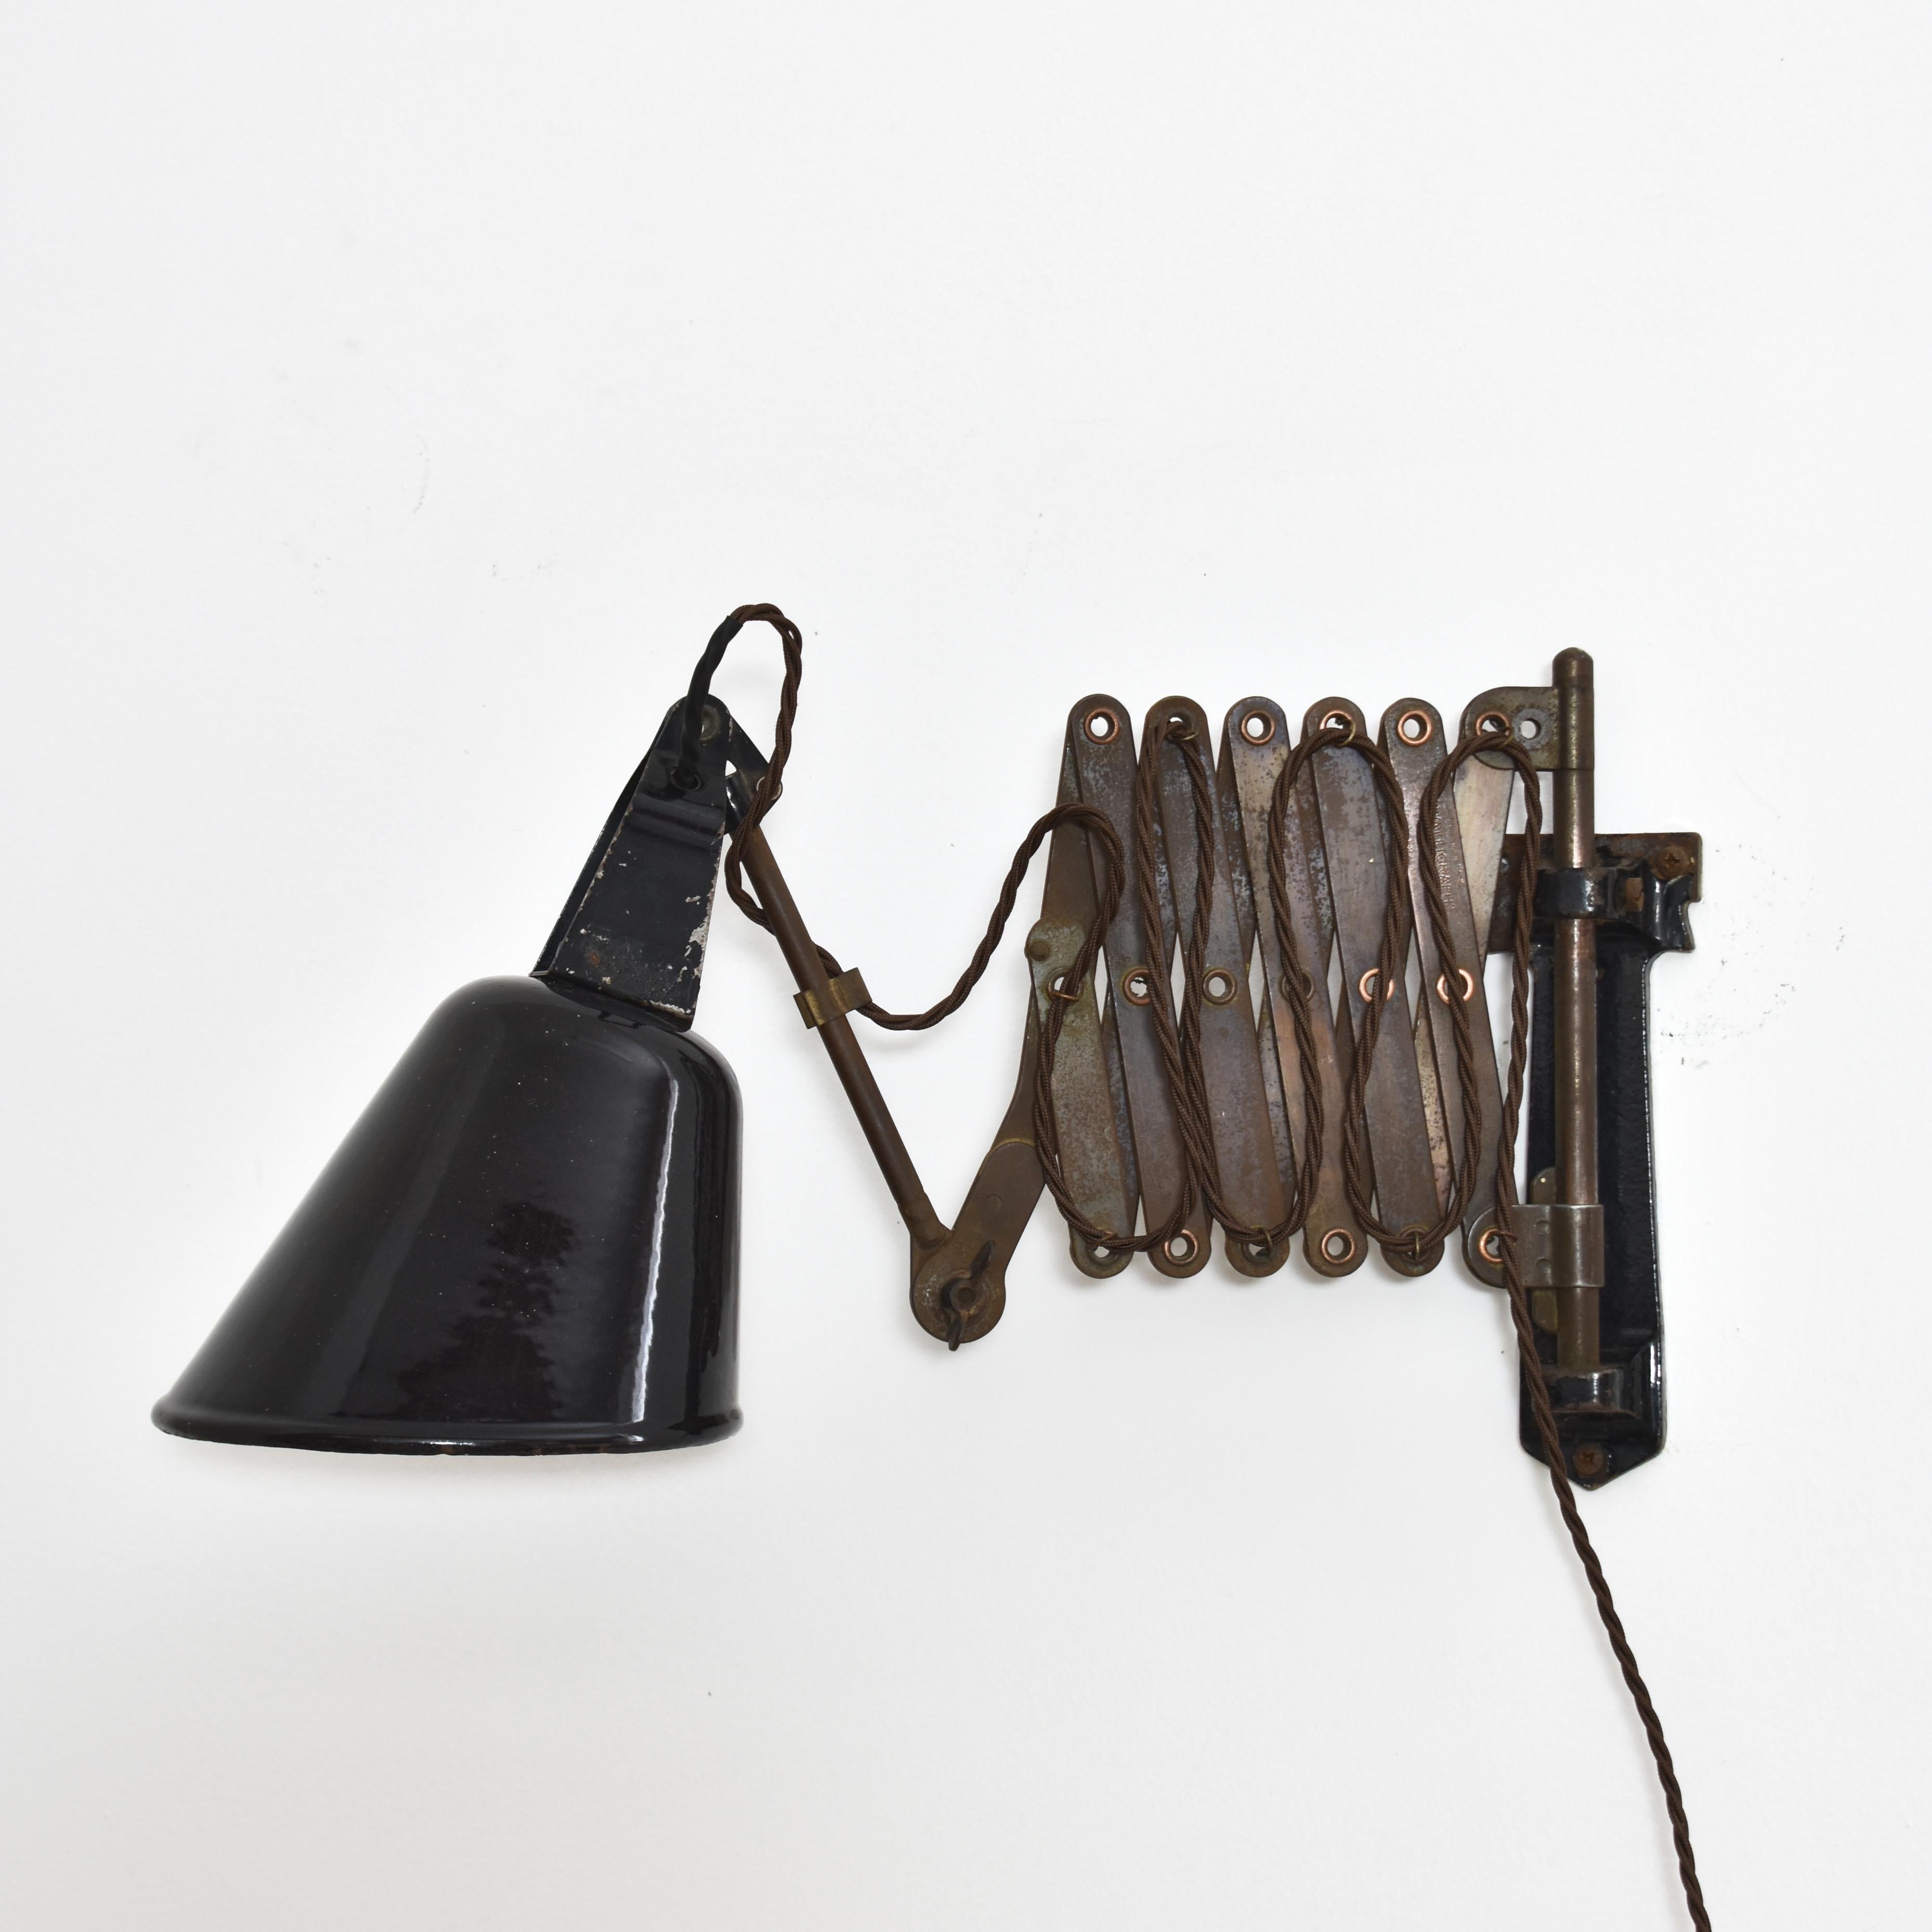 Radialite Industrial Antique Vintage Scissor Wall Light By Walligraph In Good Condition For Sale In Stockbridge, GB